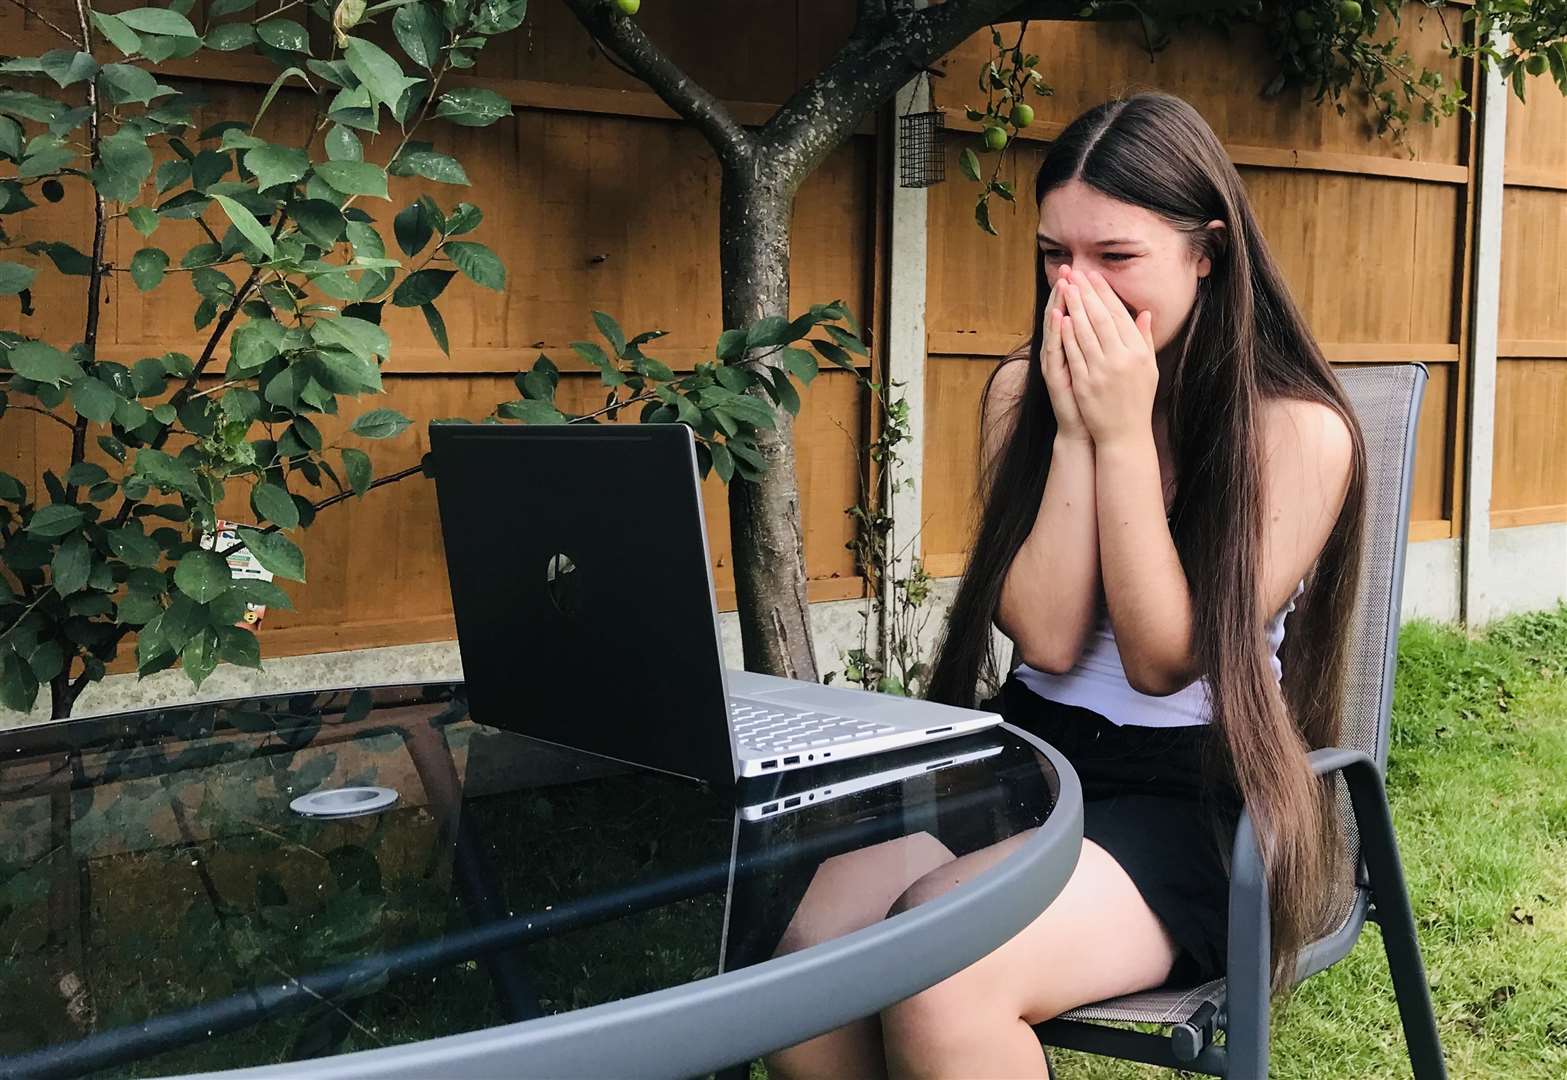 Westlands pupil Joanne Washer discovered her GCSE results online in her garden. She said: “Thank you to all my teachers! I am so pleased with my results and look forward to celebrating.”